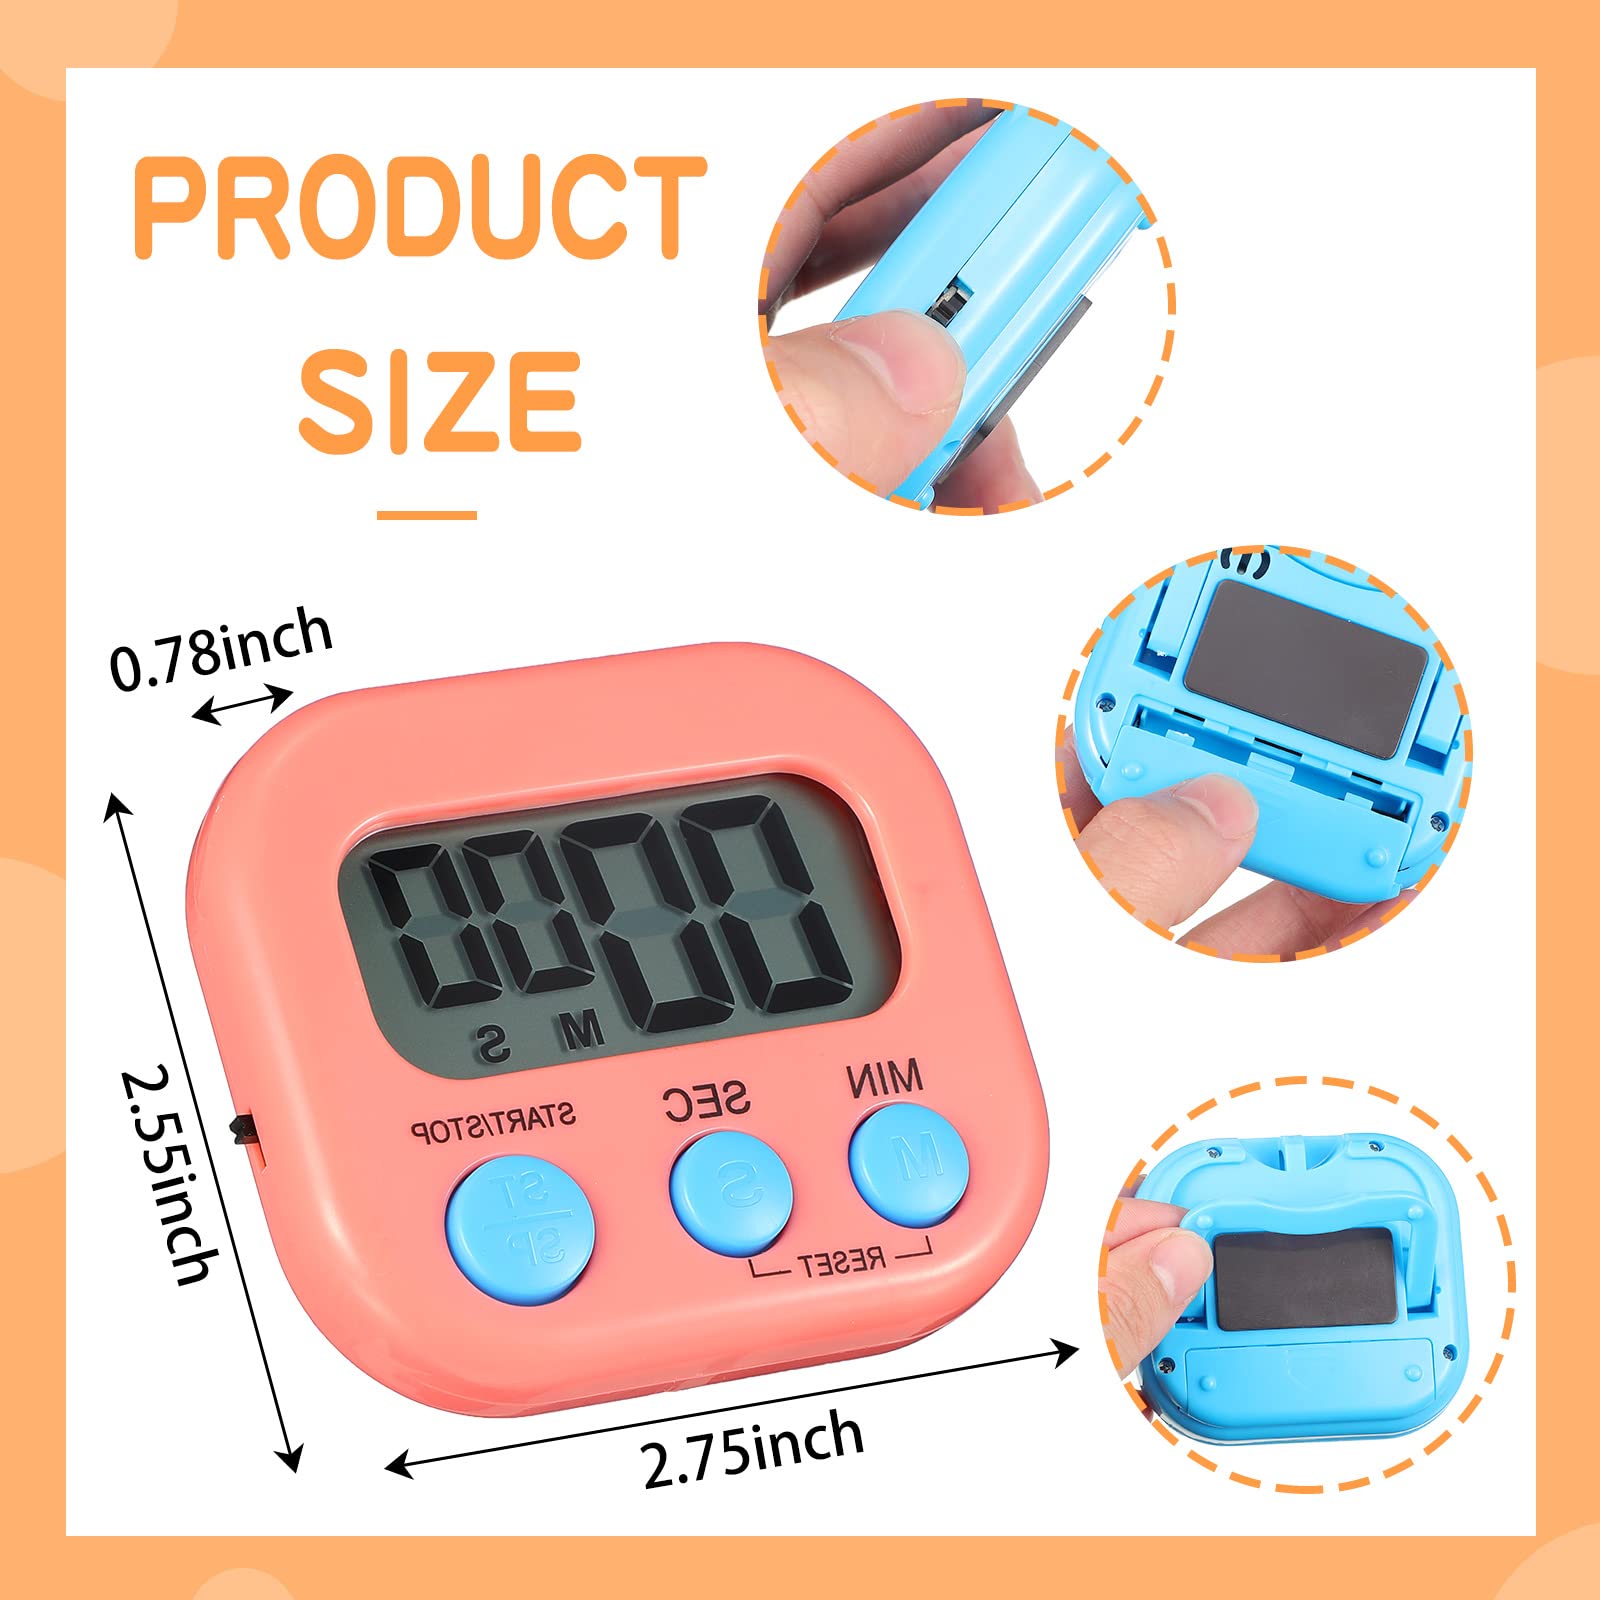 16 Pieces Small Digital Kitchen Timer Classroom Timers for Students in 100th Day of School Magnetic Back and ON Switch Minute Second Count Up Countdown with Matching Ropes, Not Including Battery